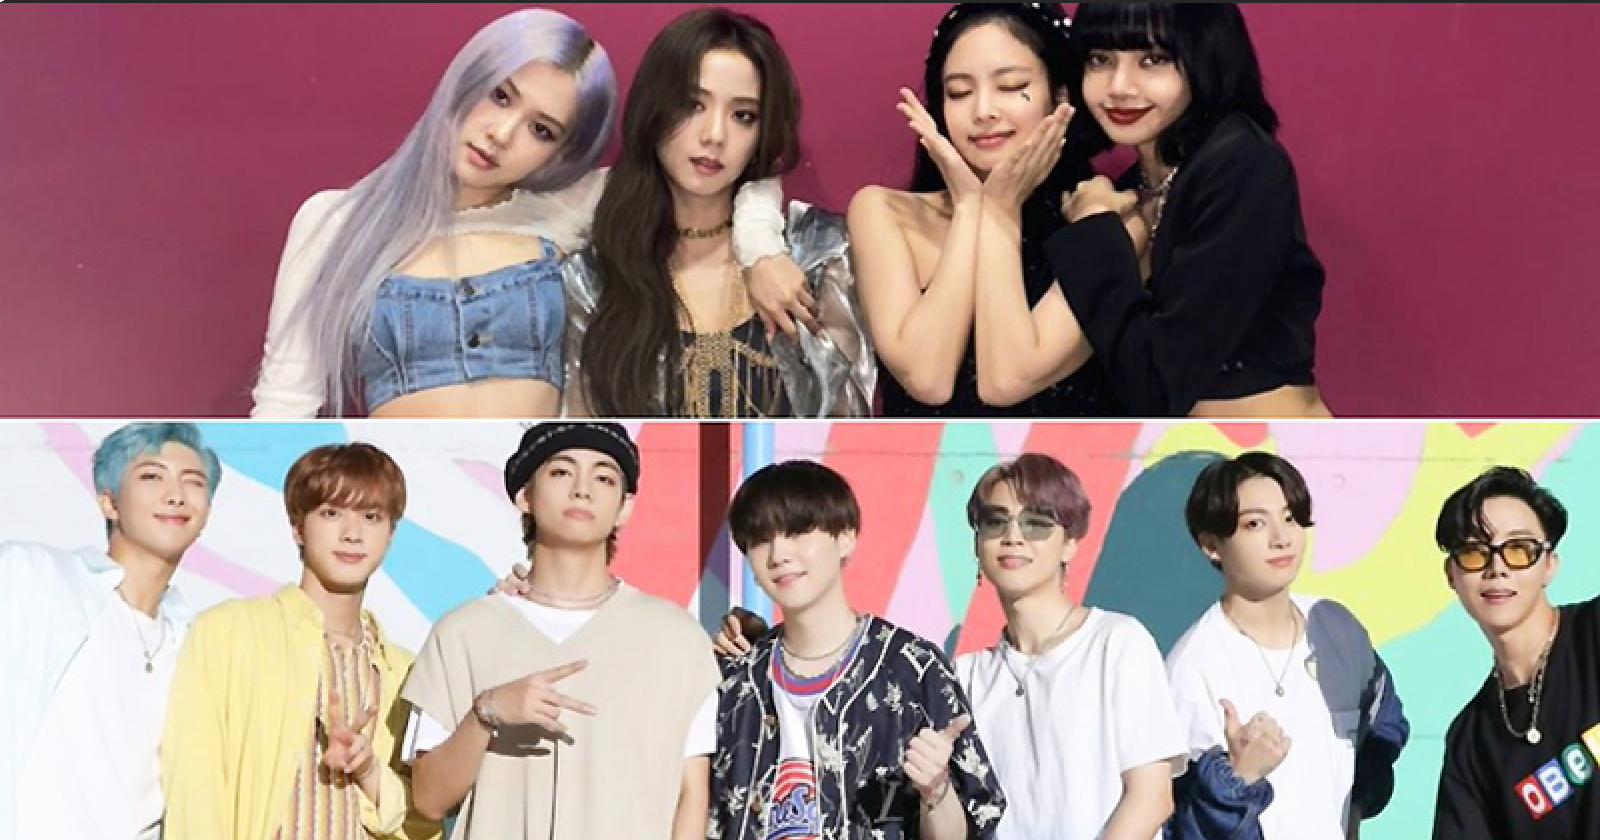 BTS Album and BLACKPINK Weverse Seen as Key Factors for HYBE's Growth 2021's 2nd Half